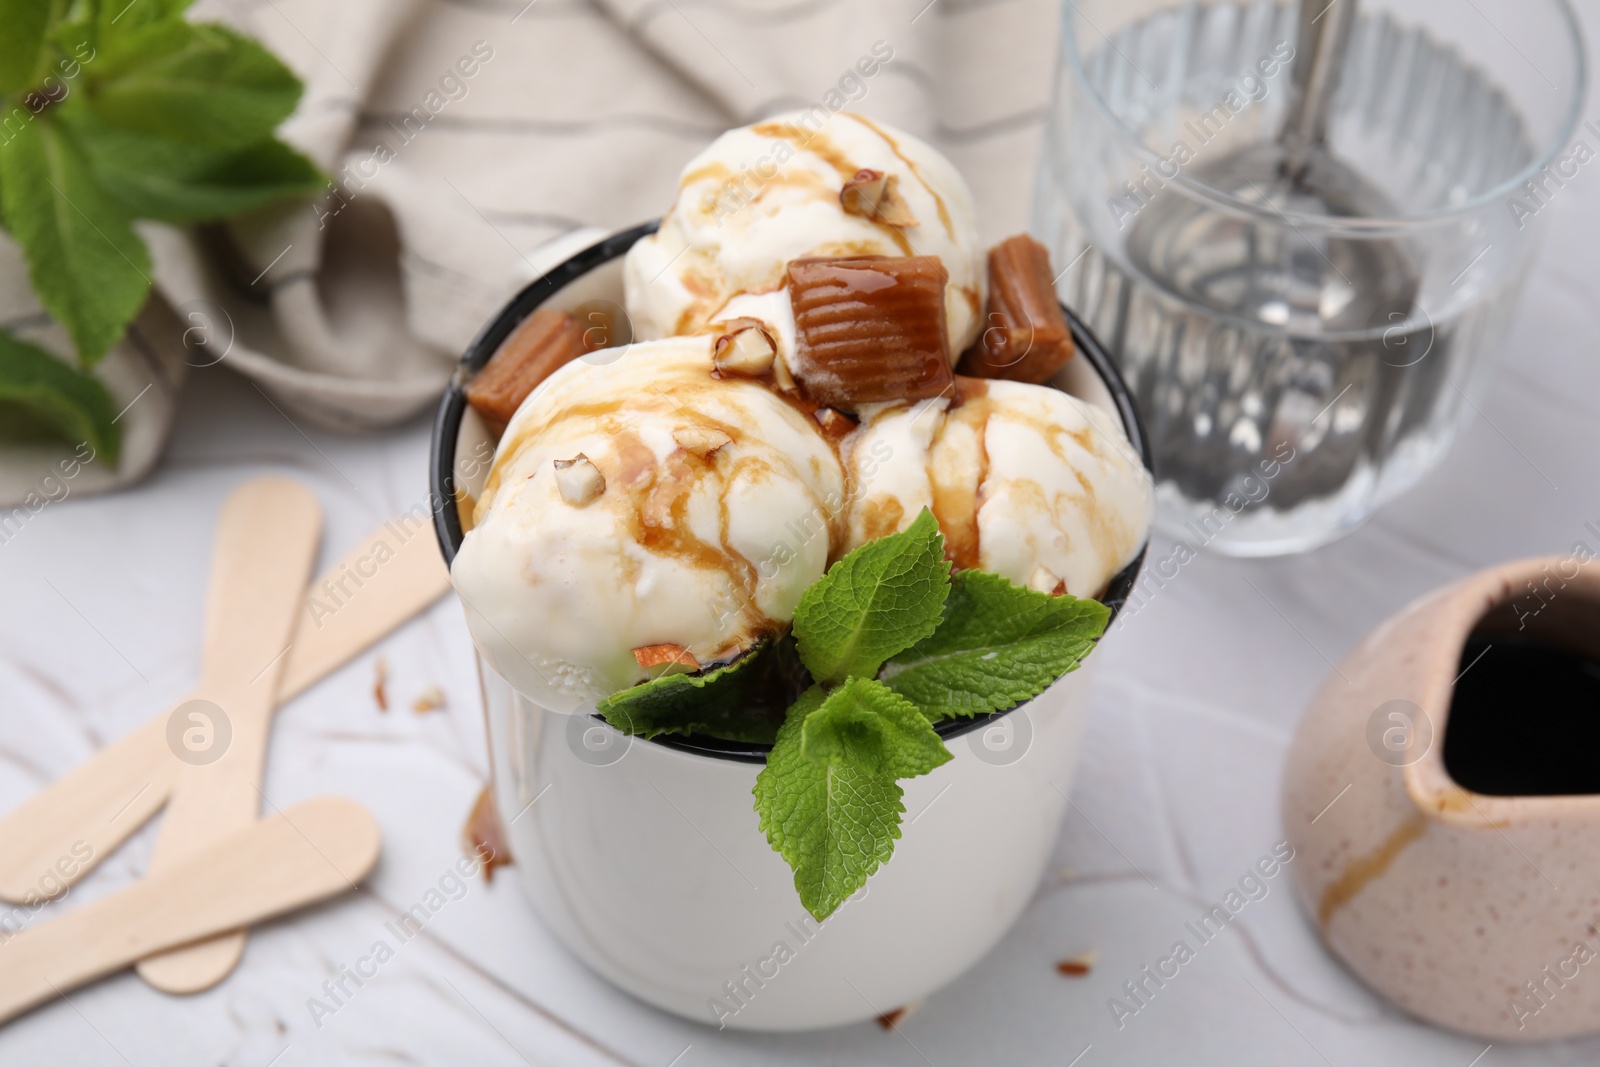 Photo of Scoops of ice cream with caramel sauce, candies and mint leaves on white textured table, closeup